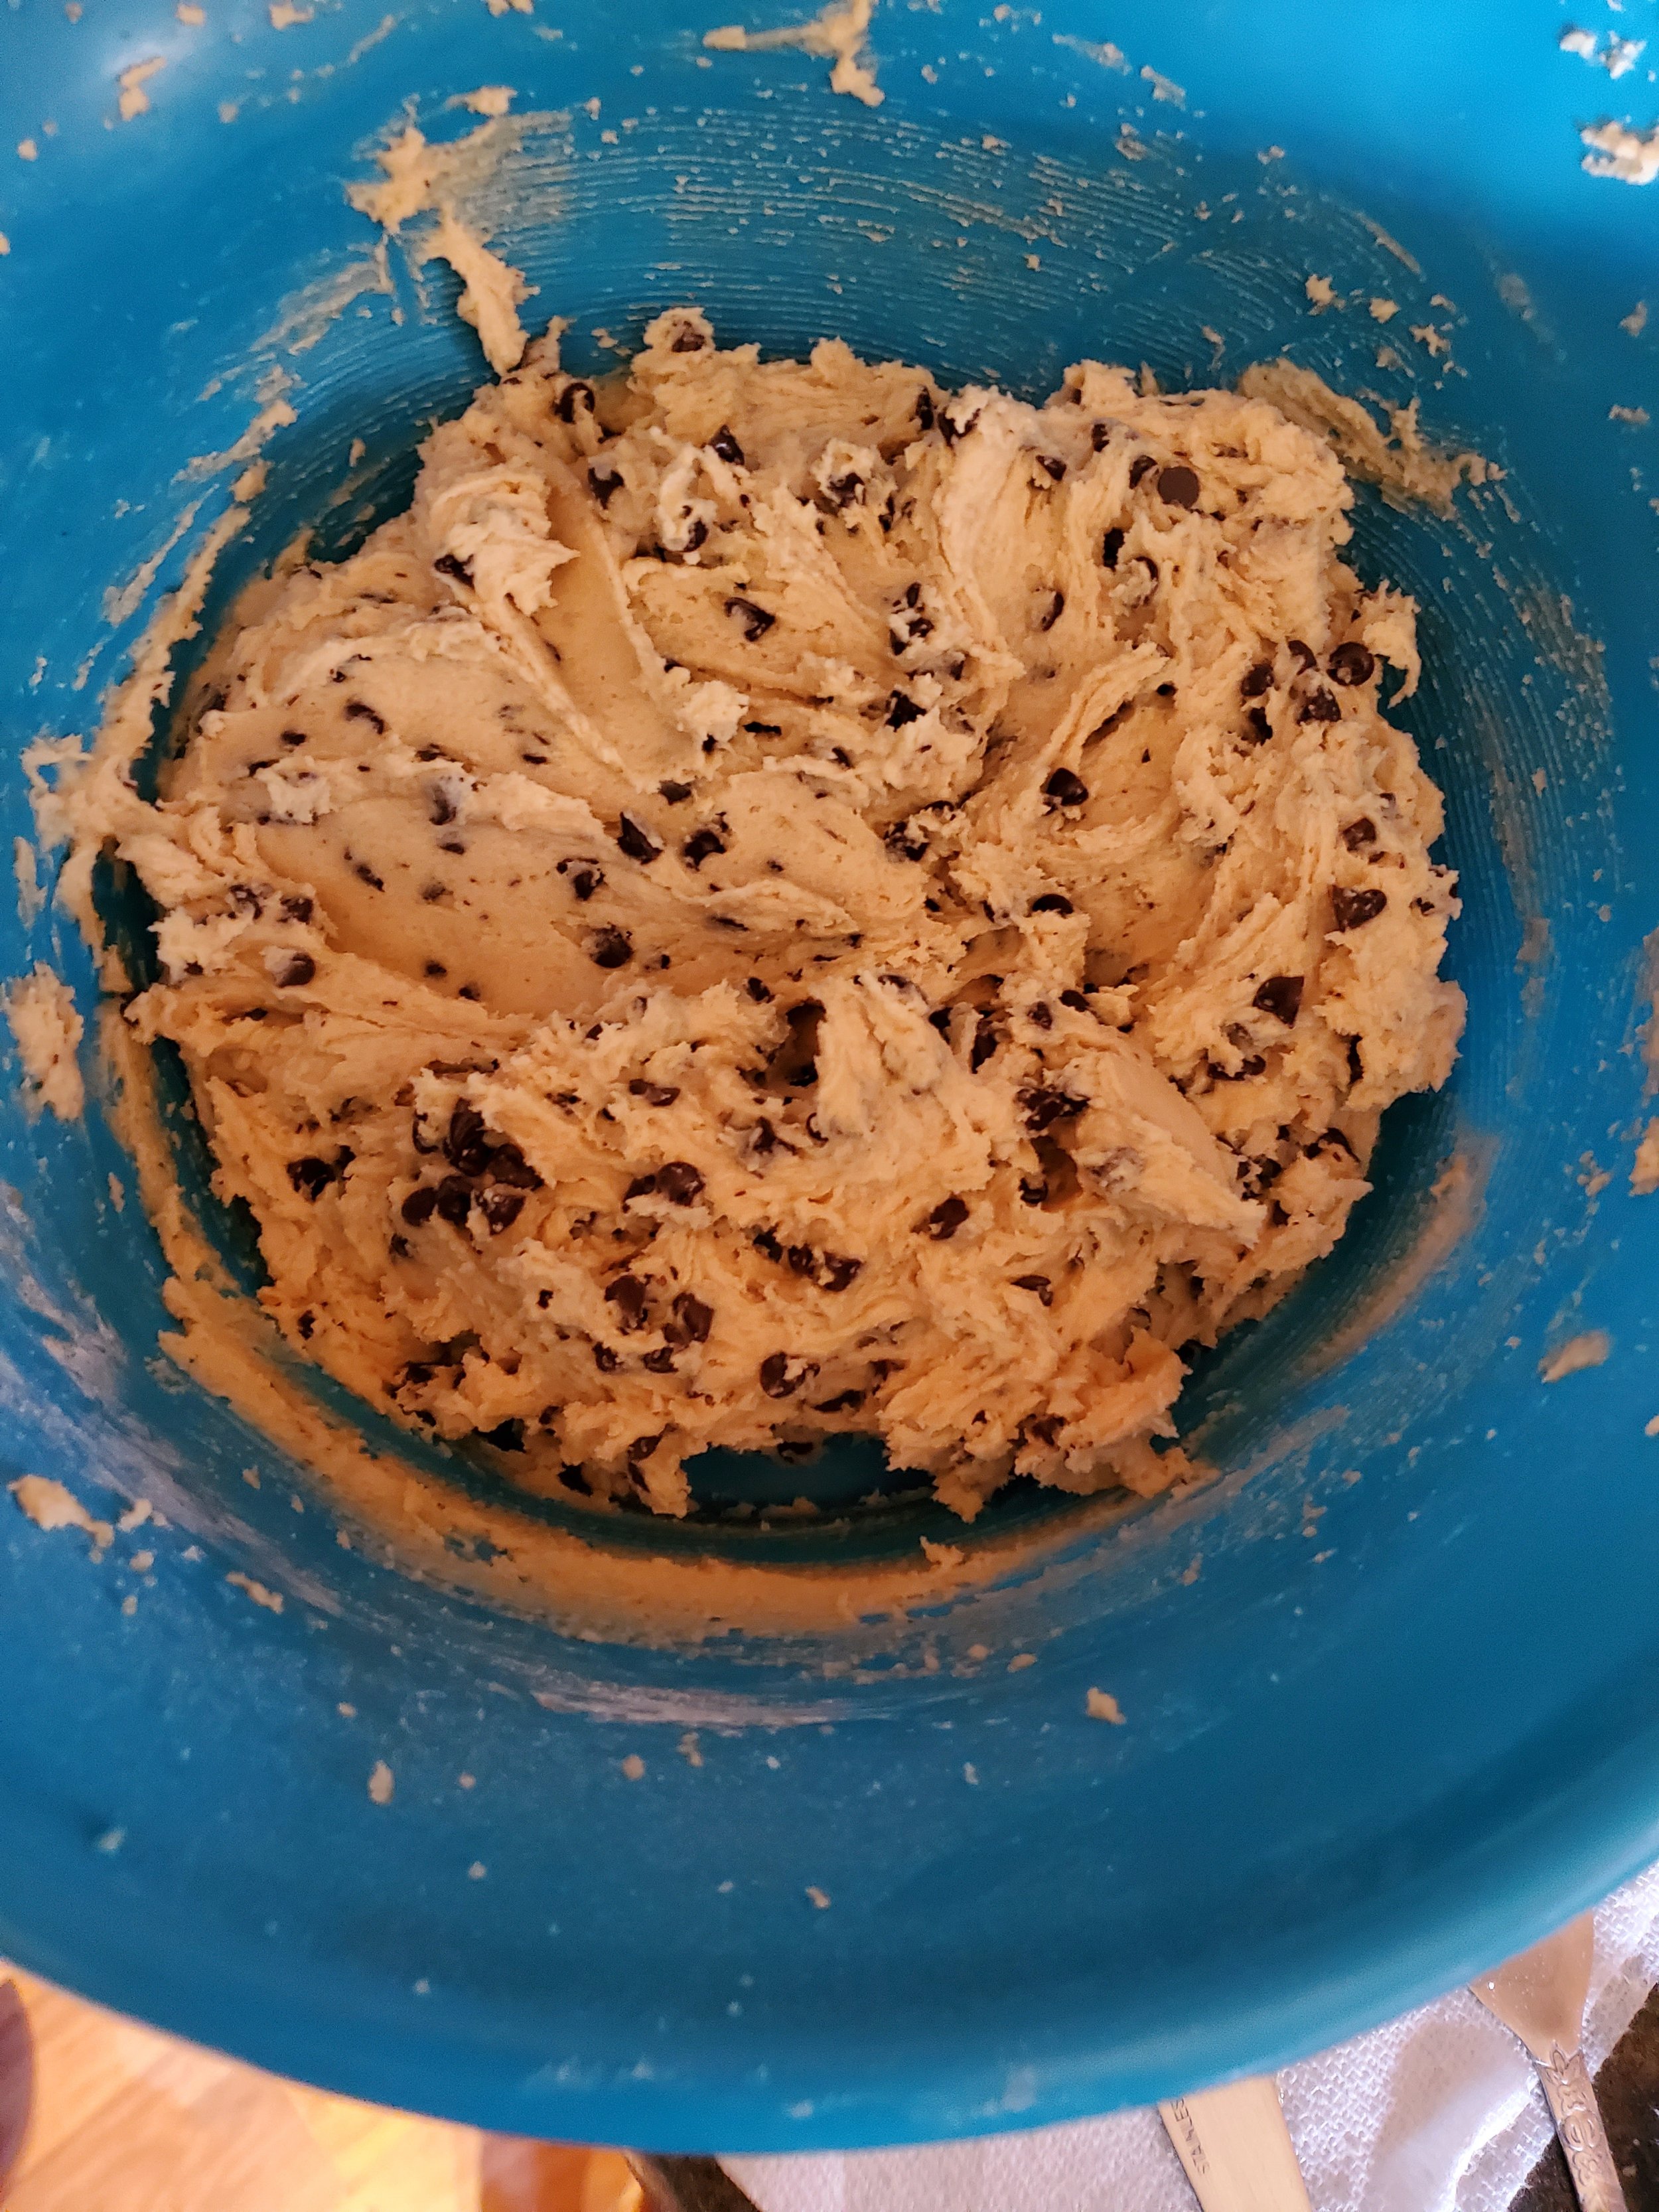 Next up was making the delicious cookie dough filling